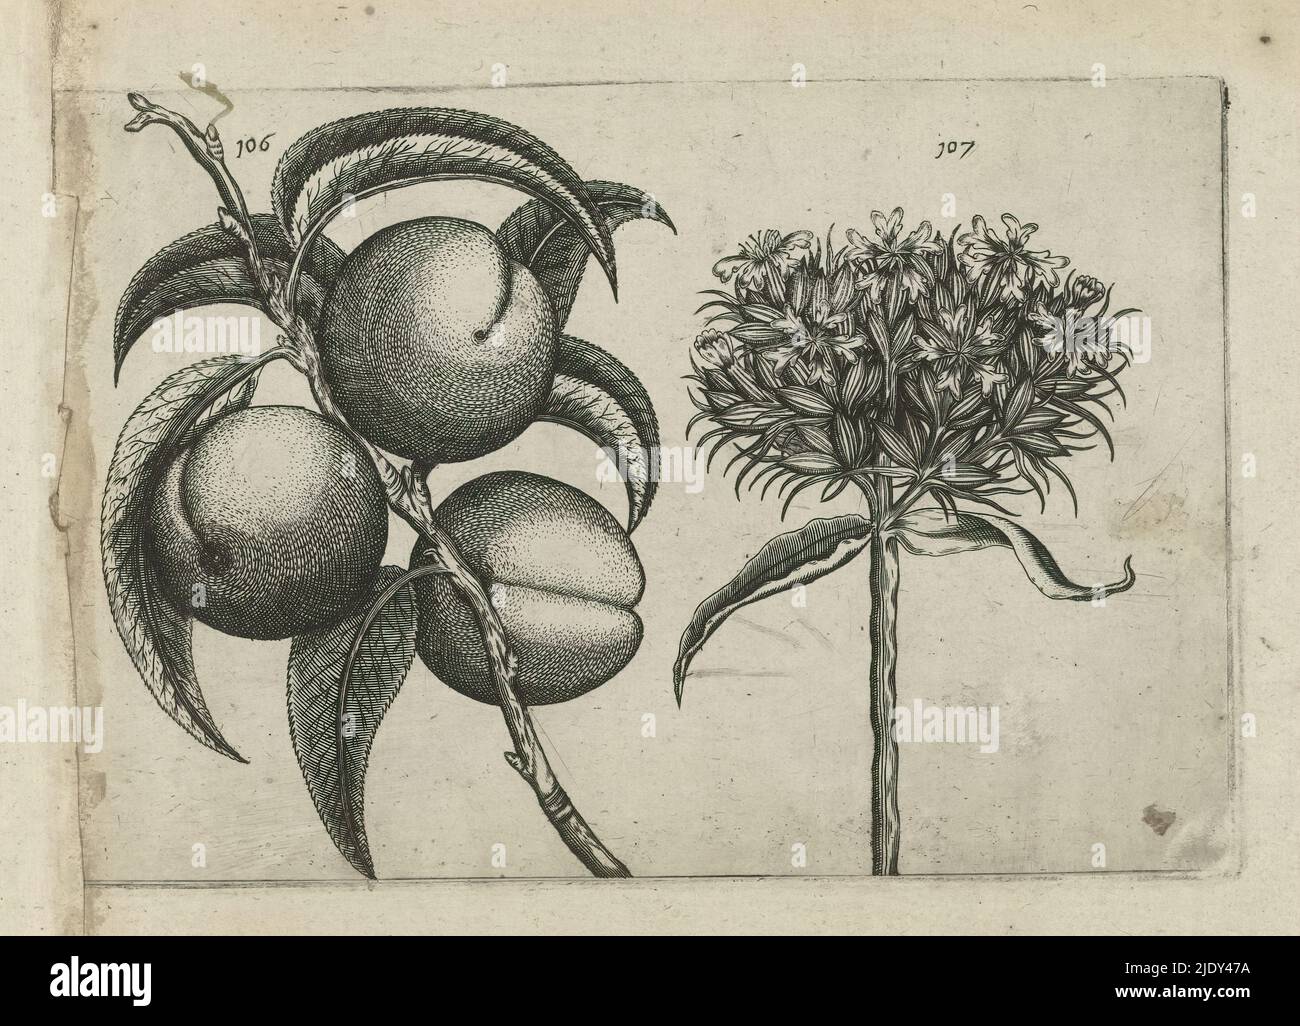 Peach and burning love, Cognoscite lilia (series title), Peach (Prunus persica) and burning love (Silene chalcedonica), numbered 106 and 107., print maker: Crispijn van de Passe (I), (attributed to), after drawing by: Crispijn van de Passe (I), (attributed to), publisher: Crispijn van de Passe (I), print maker: Cologne, after drawing by: Cologne, publisher: Cologne, publisher: London, 1600 - 1604, paper, engraving, height 127 mm × width 205 mm, height 172 mm × width 272 mm Stock Photo